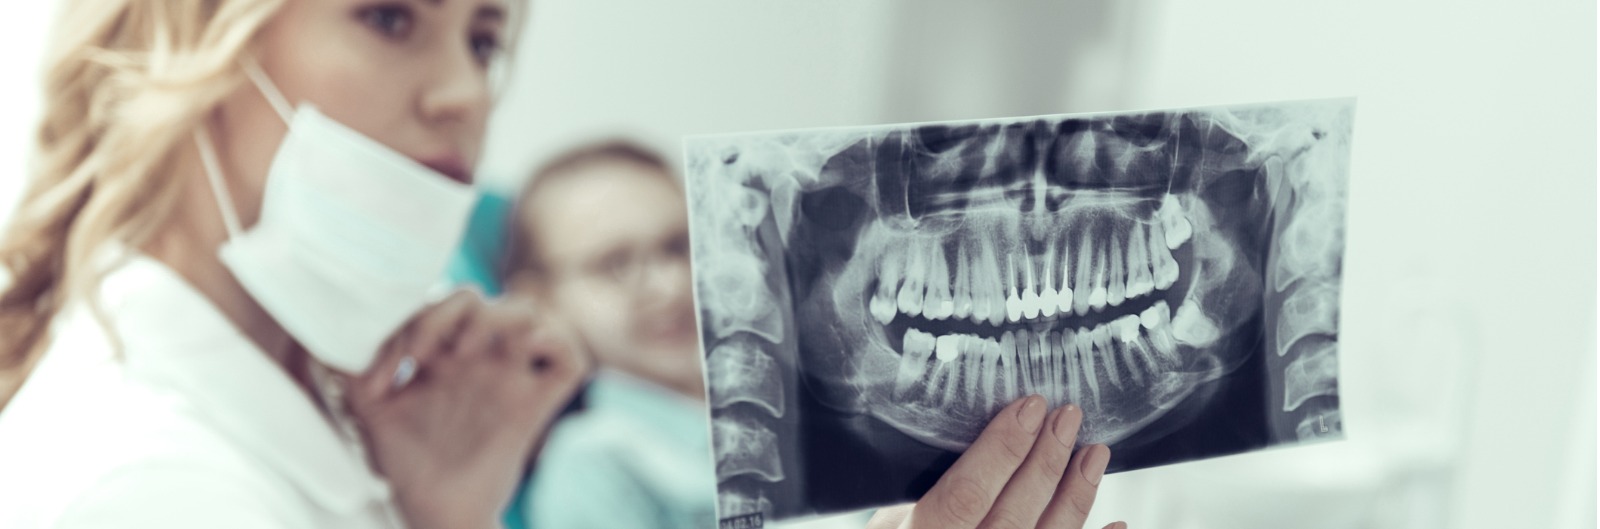 results-of-an-xray-in-the-hands-of-a-young-dentist-picture-1600x529.jpg